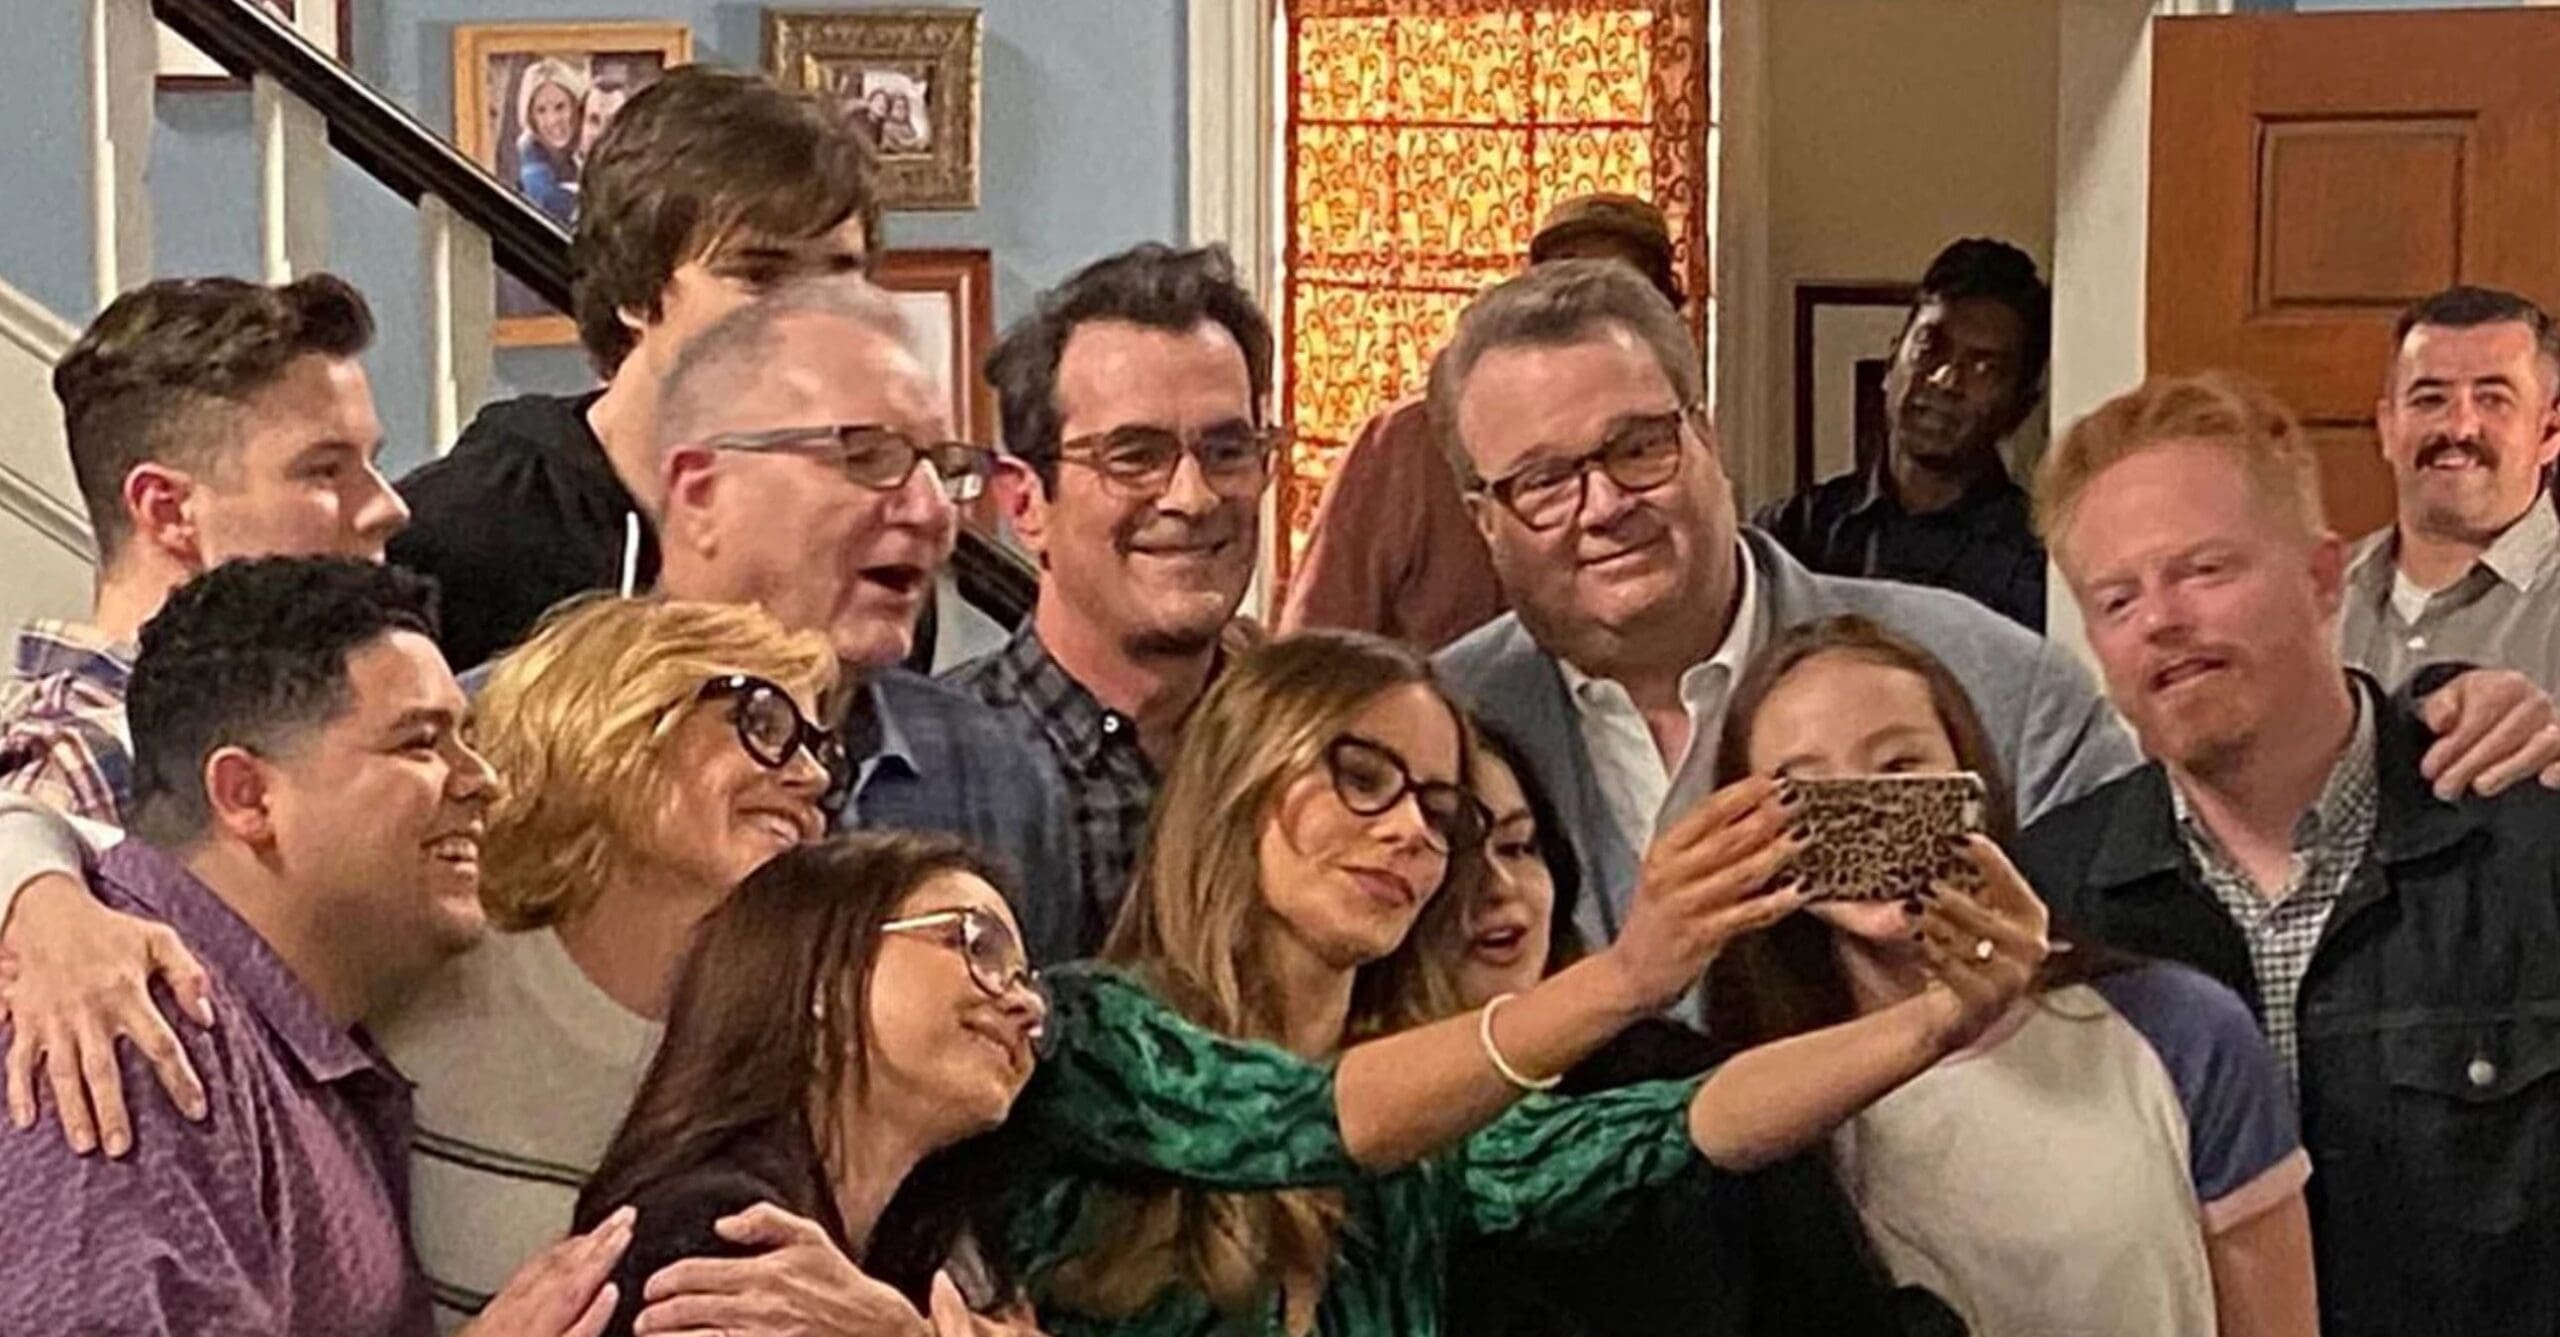 An image of the cast of the American TV show Modern Family taking a selfie